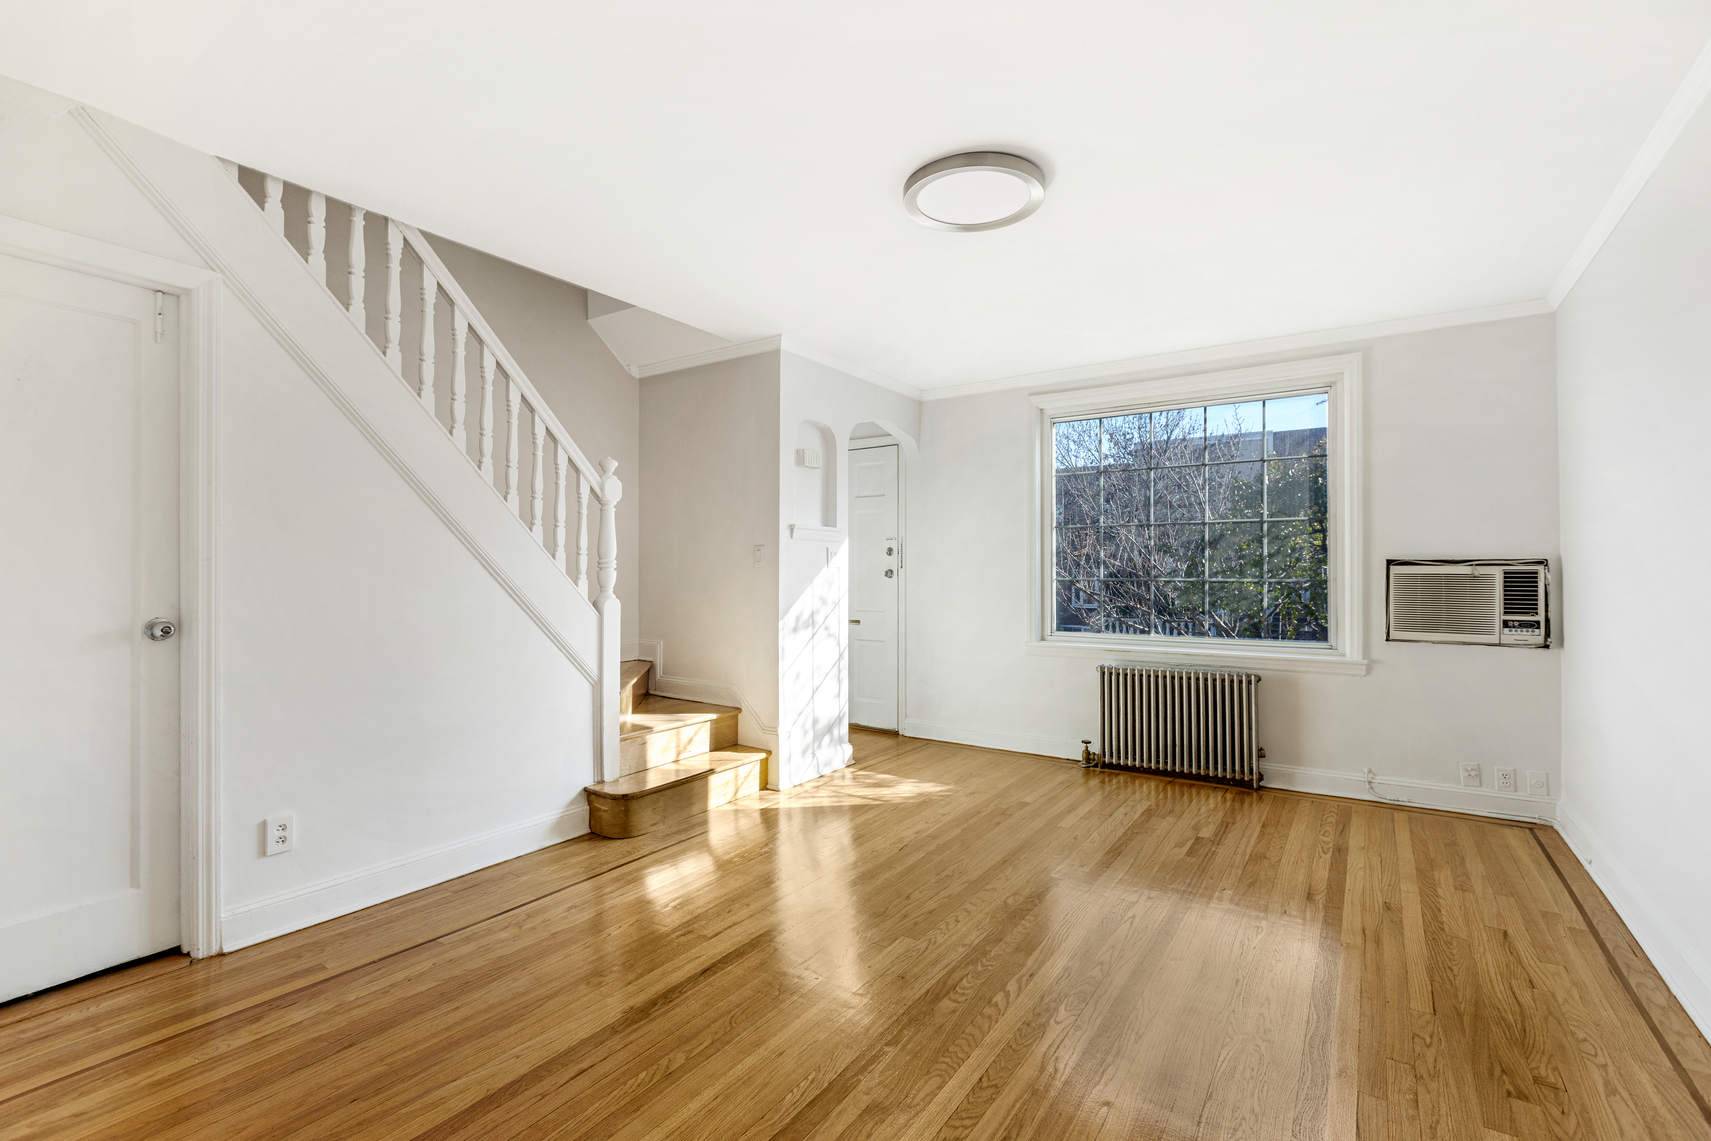 Fully renovated brick home, this Ditmars area one family is move in ready.